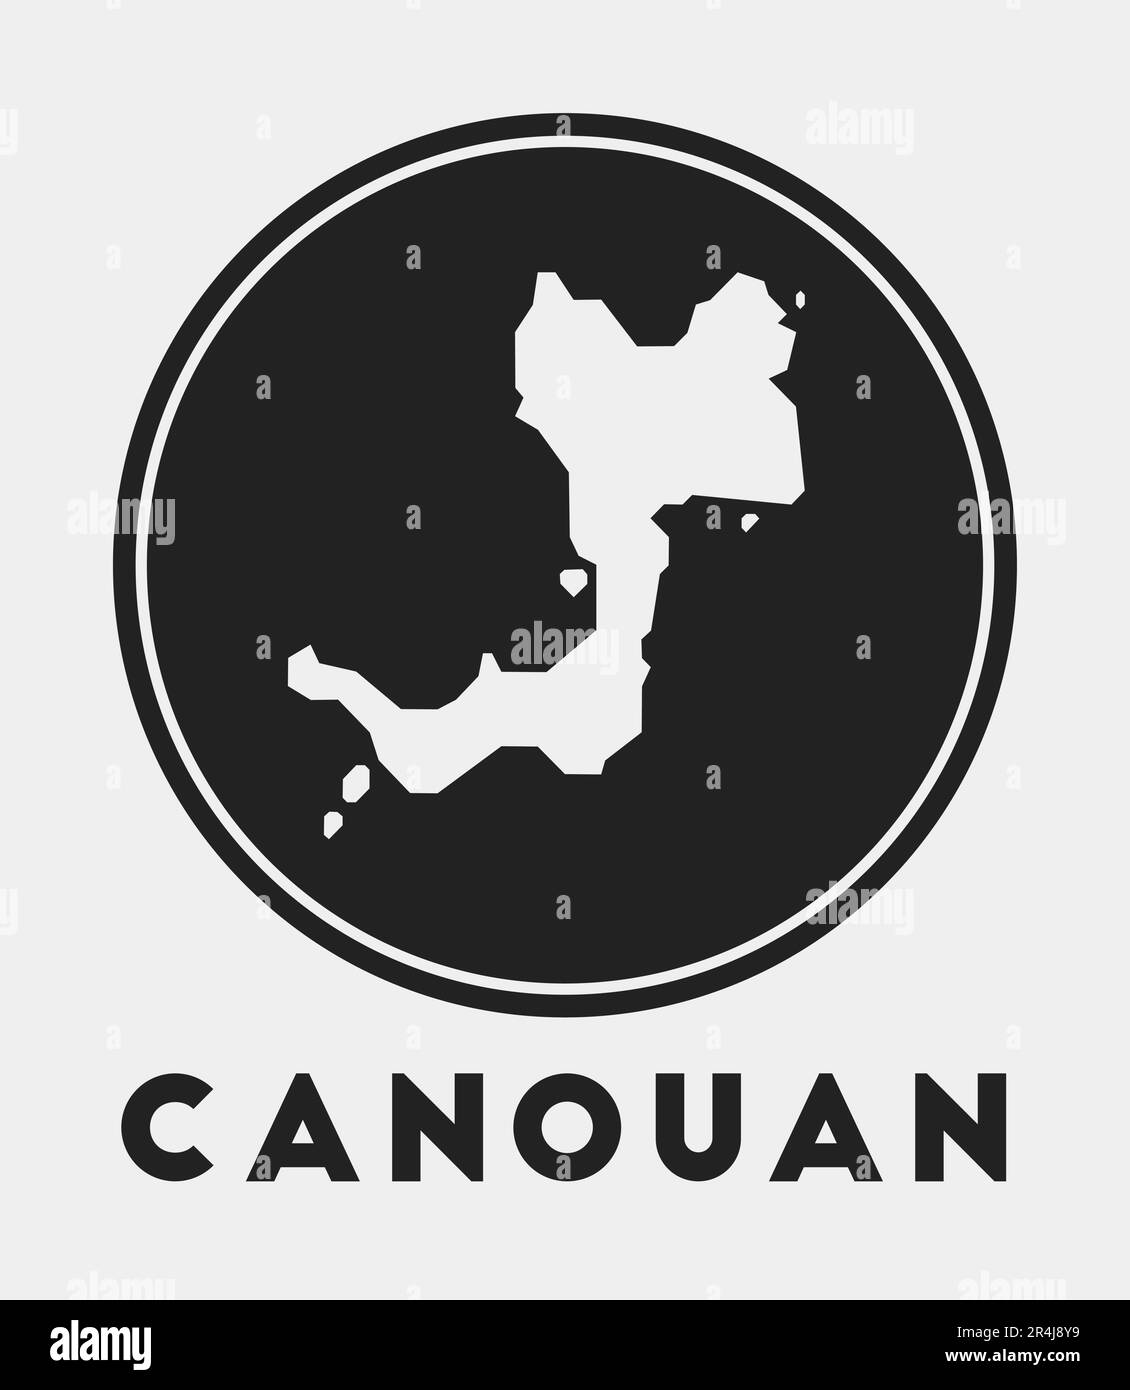 Canouan icon. Round logo with island map and title. Stylish Canouan ...